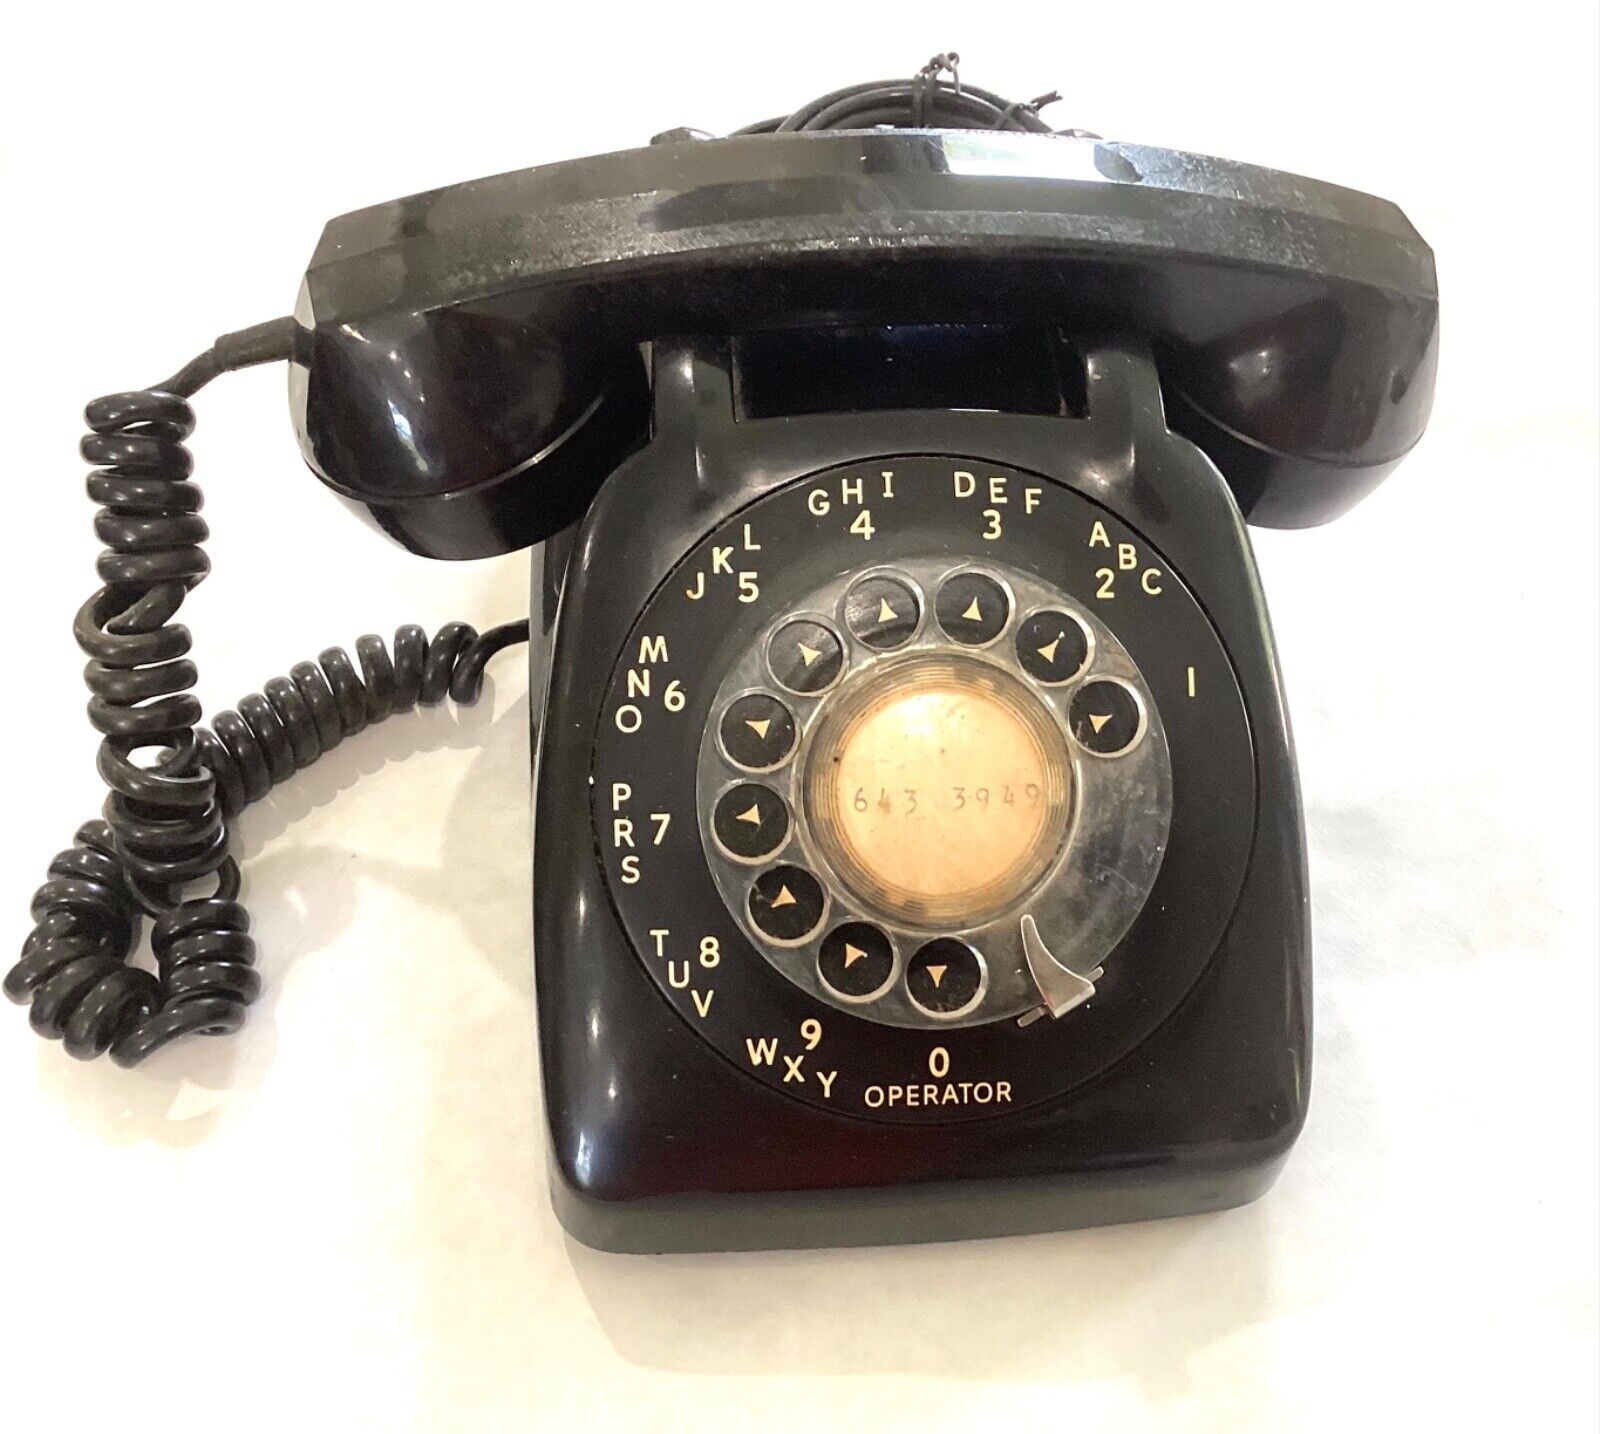 Antique Black Rotary Telephone 1966 Phone Automatic Electric NB802 CXX 9-66-4 US